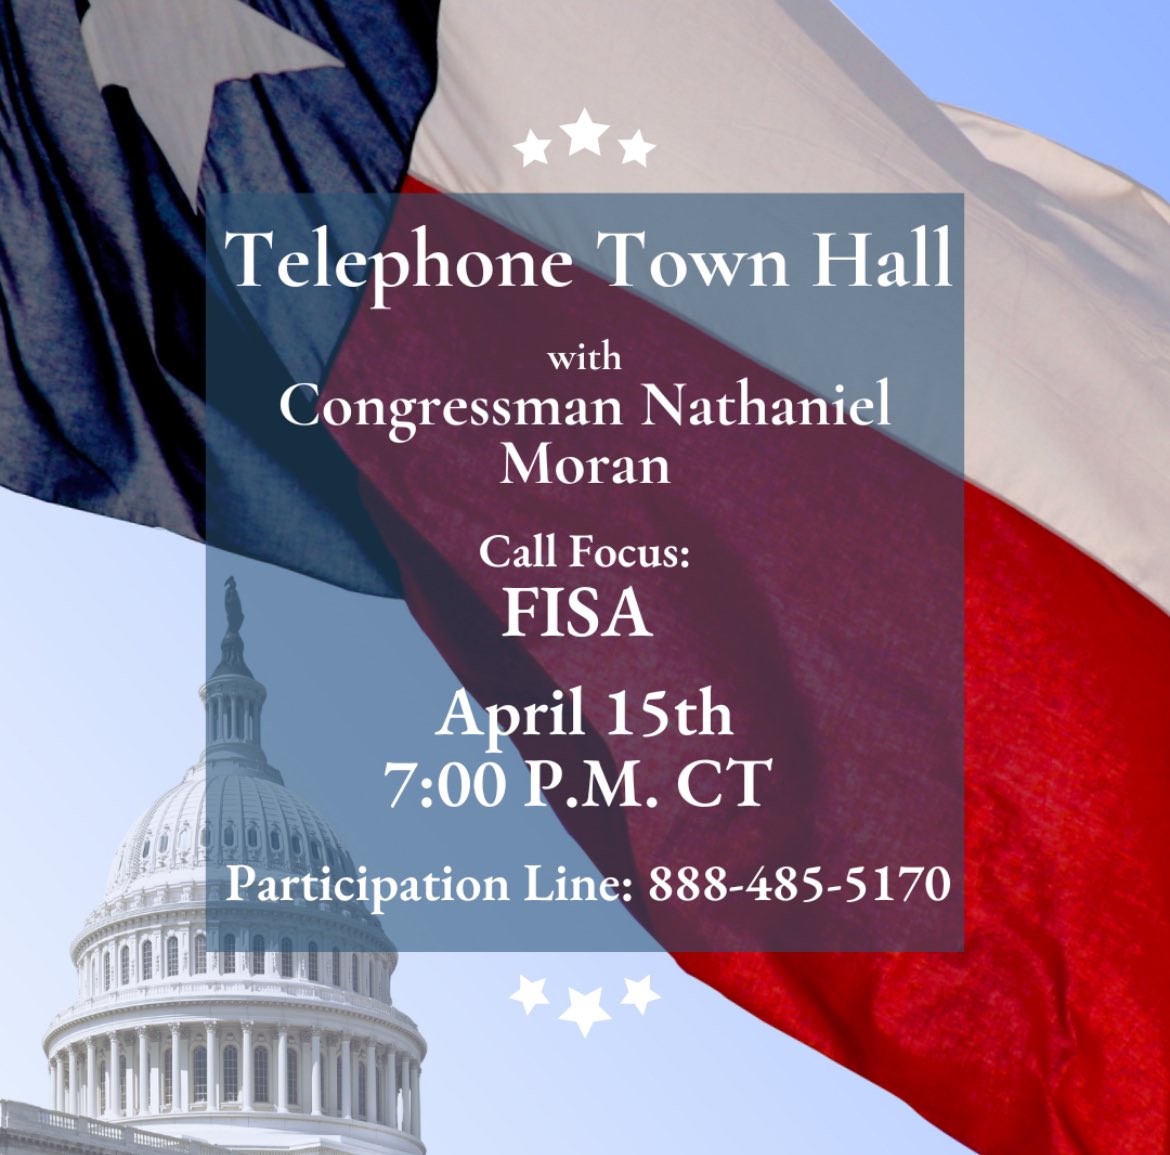 Join me Monday, April 15th at 7:00 PM CT for my 13th Tele-Townhall! If you are interested in joining, you can dial in at (888) 485-5170. It’s an hour of Q&A, and a time for me to update you on my work in Congress on your behalf.